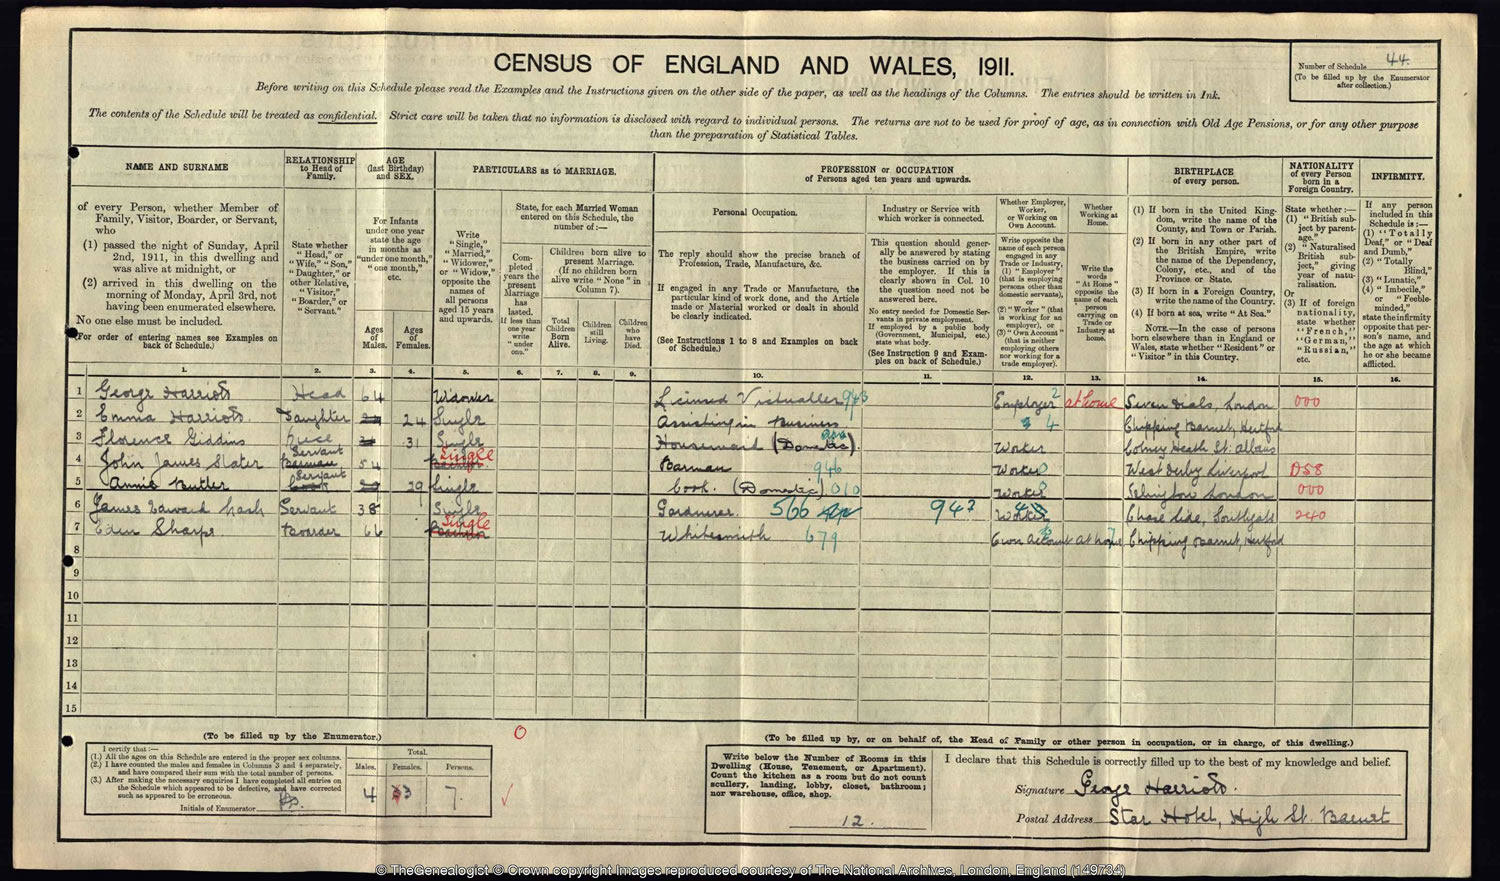 1911 census of the High Street in Barnet shows that George Harriott was the employer at the Star Hotel